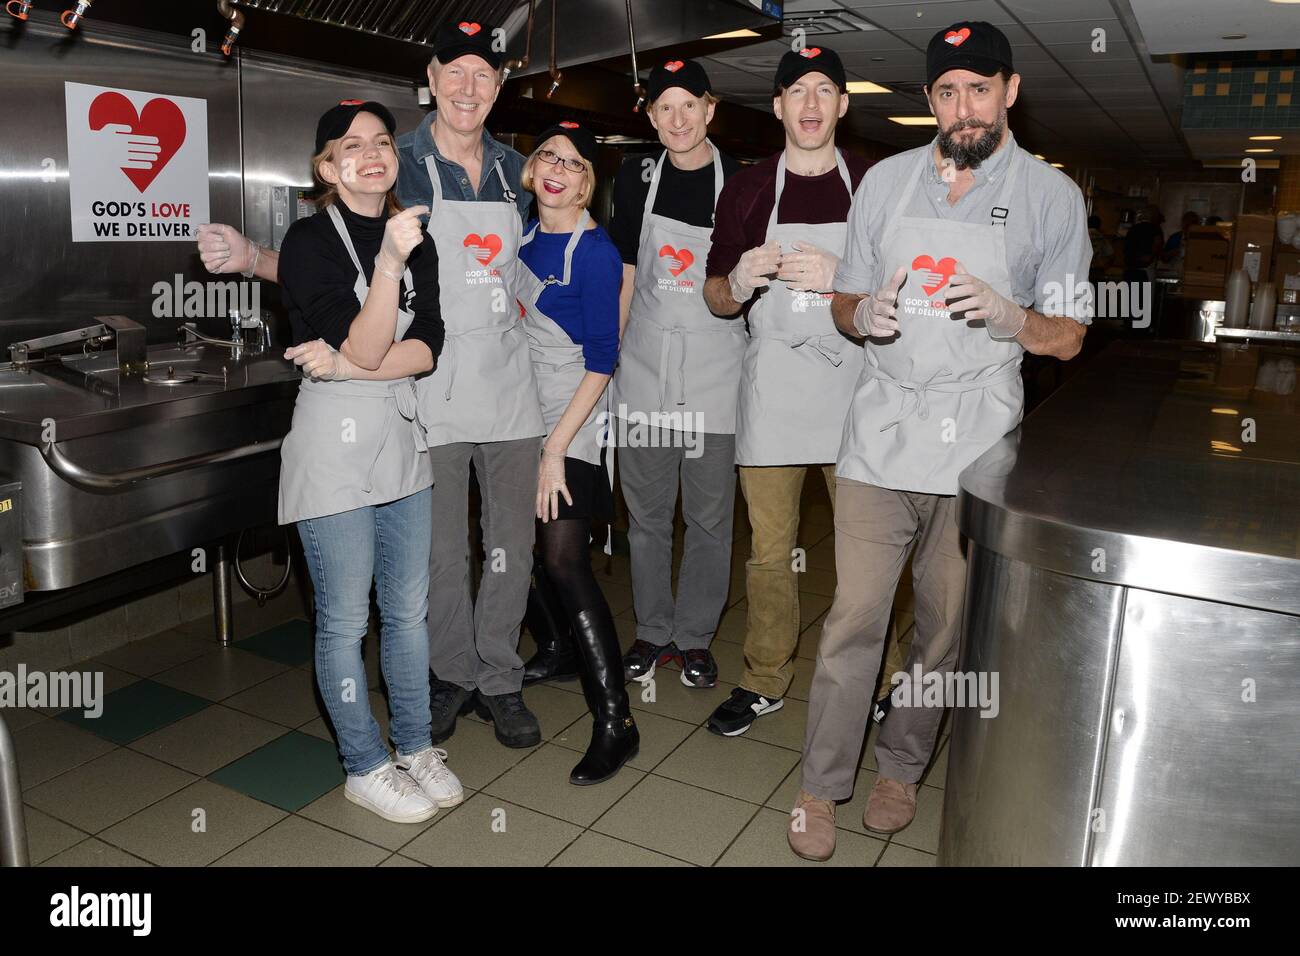 You Can't Take It With You" cast members (l-r) Anna Chlumsky, Byron  Jennings, Julie Halston, Nick Corley, Franz Kranz and Reg Rogers volunteer  to prepare meals at God's Love We Deliver kitchens